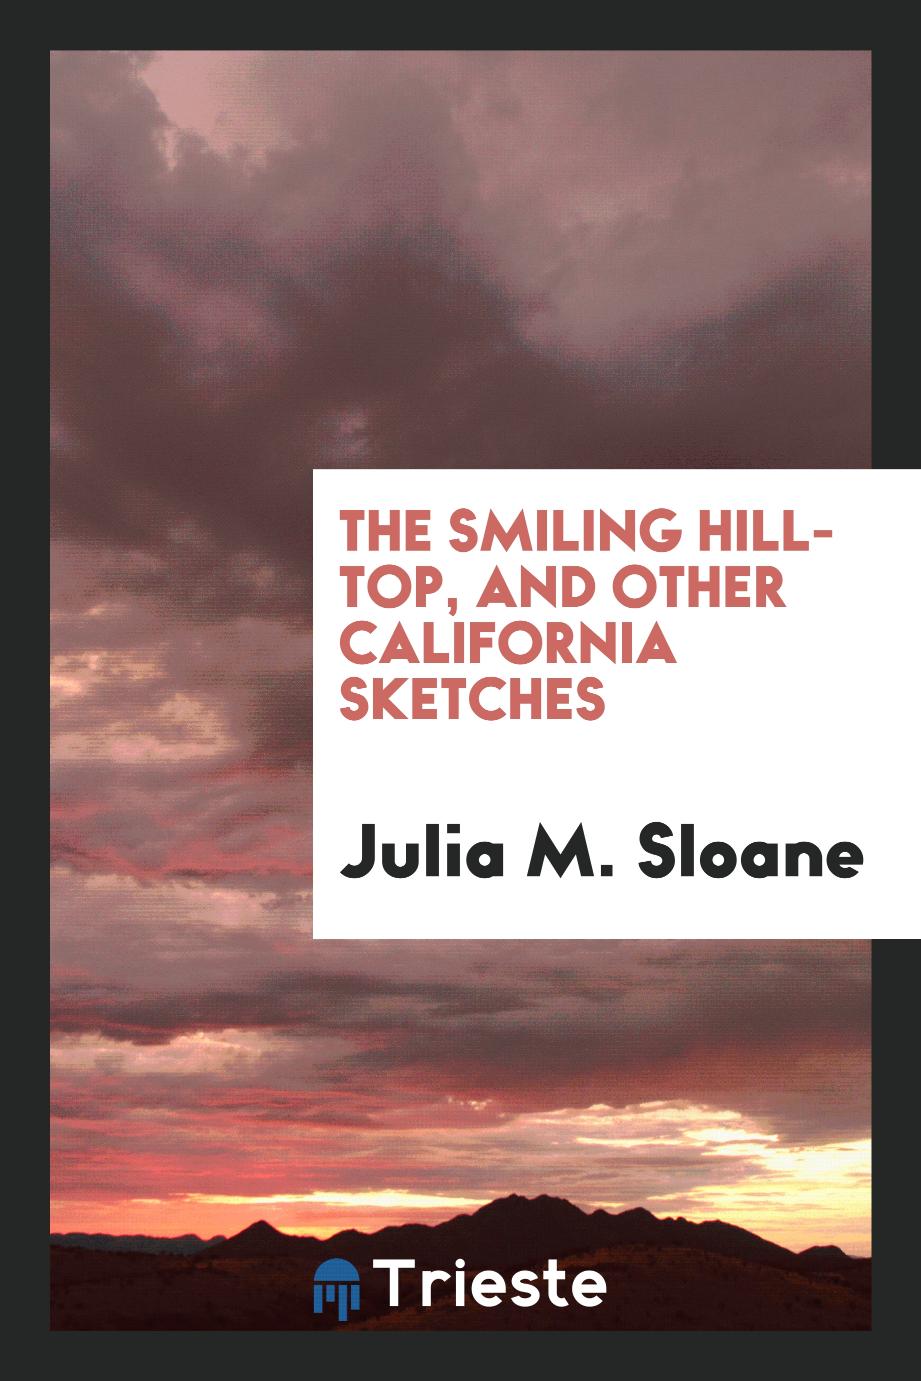 The smiling hill-top, and other California sketches